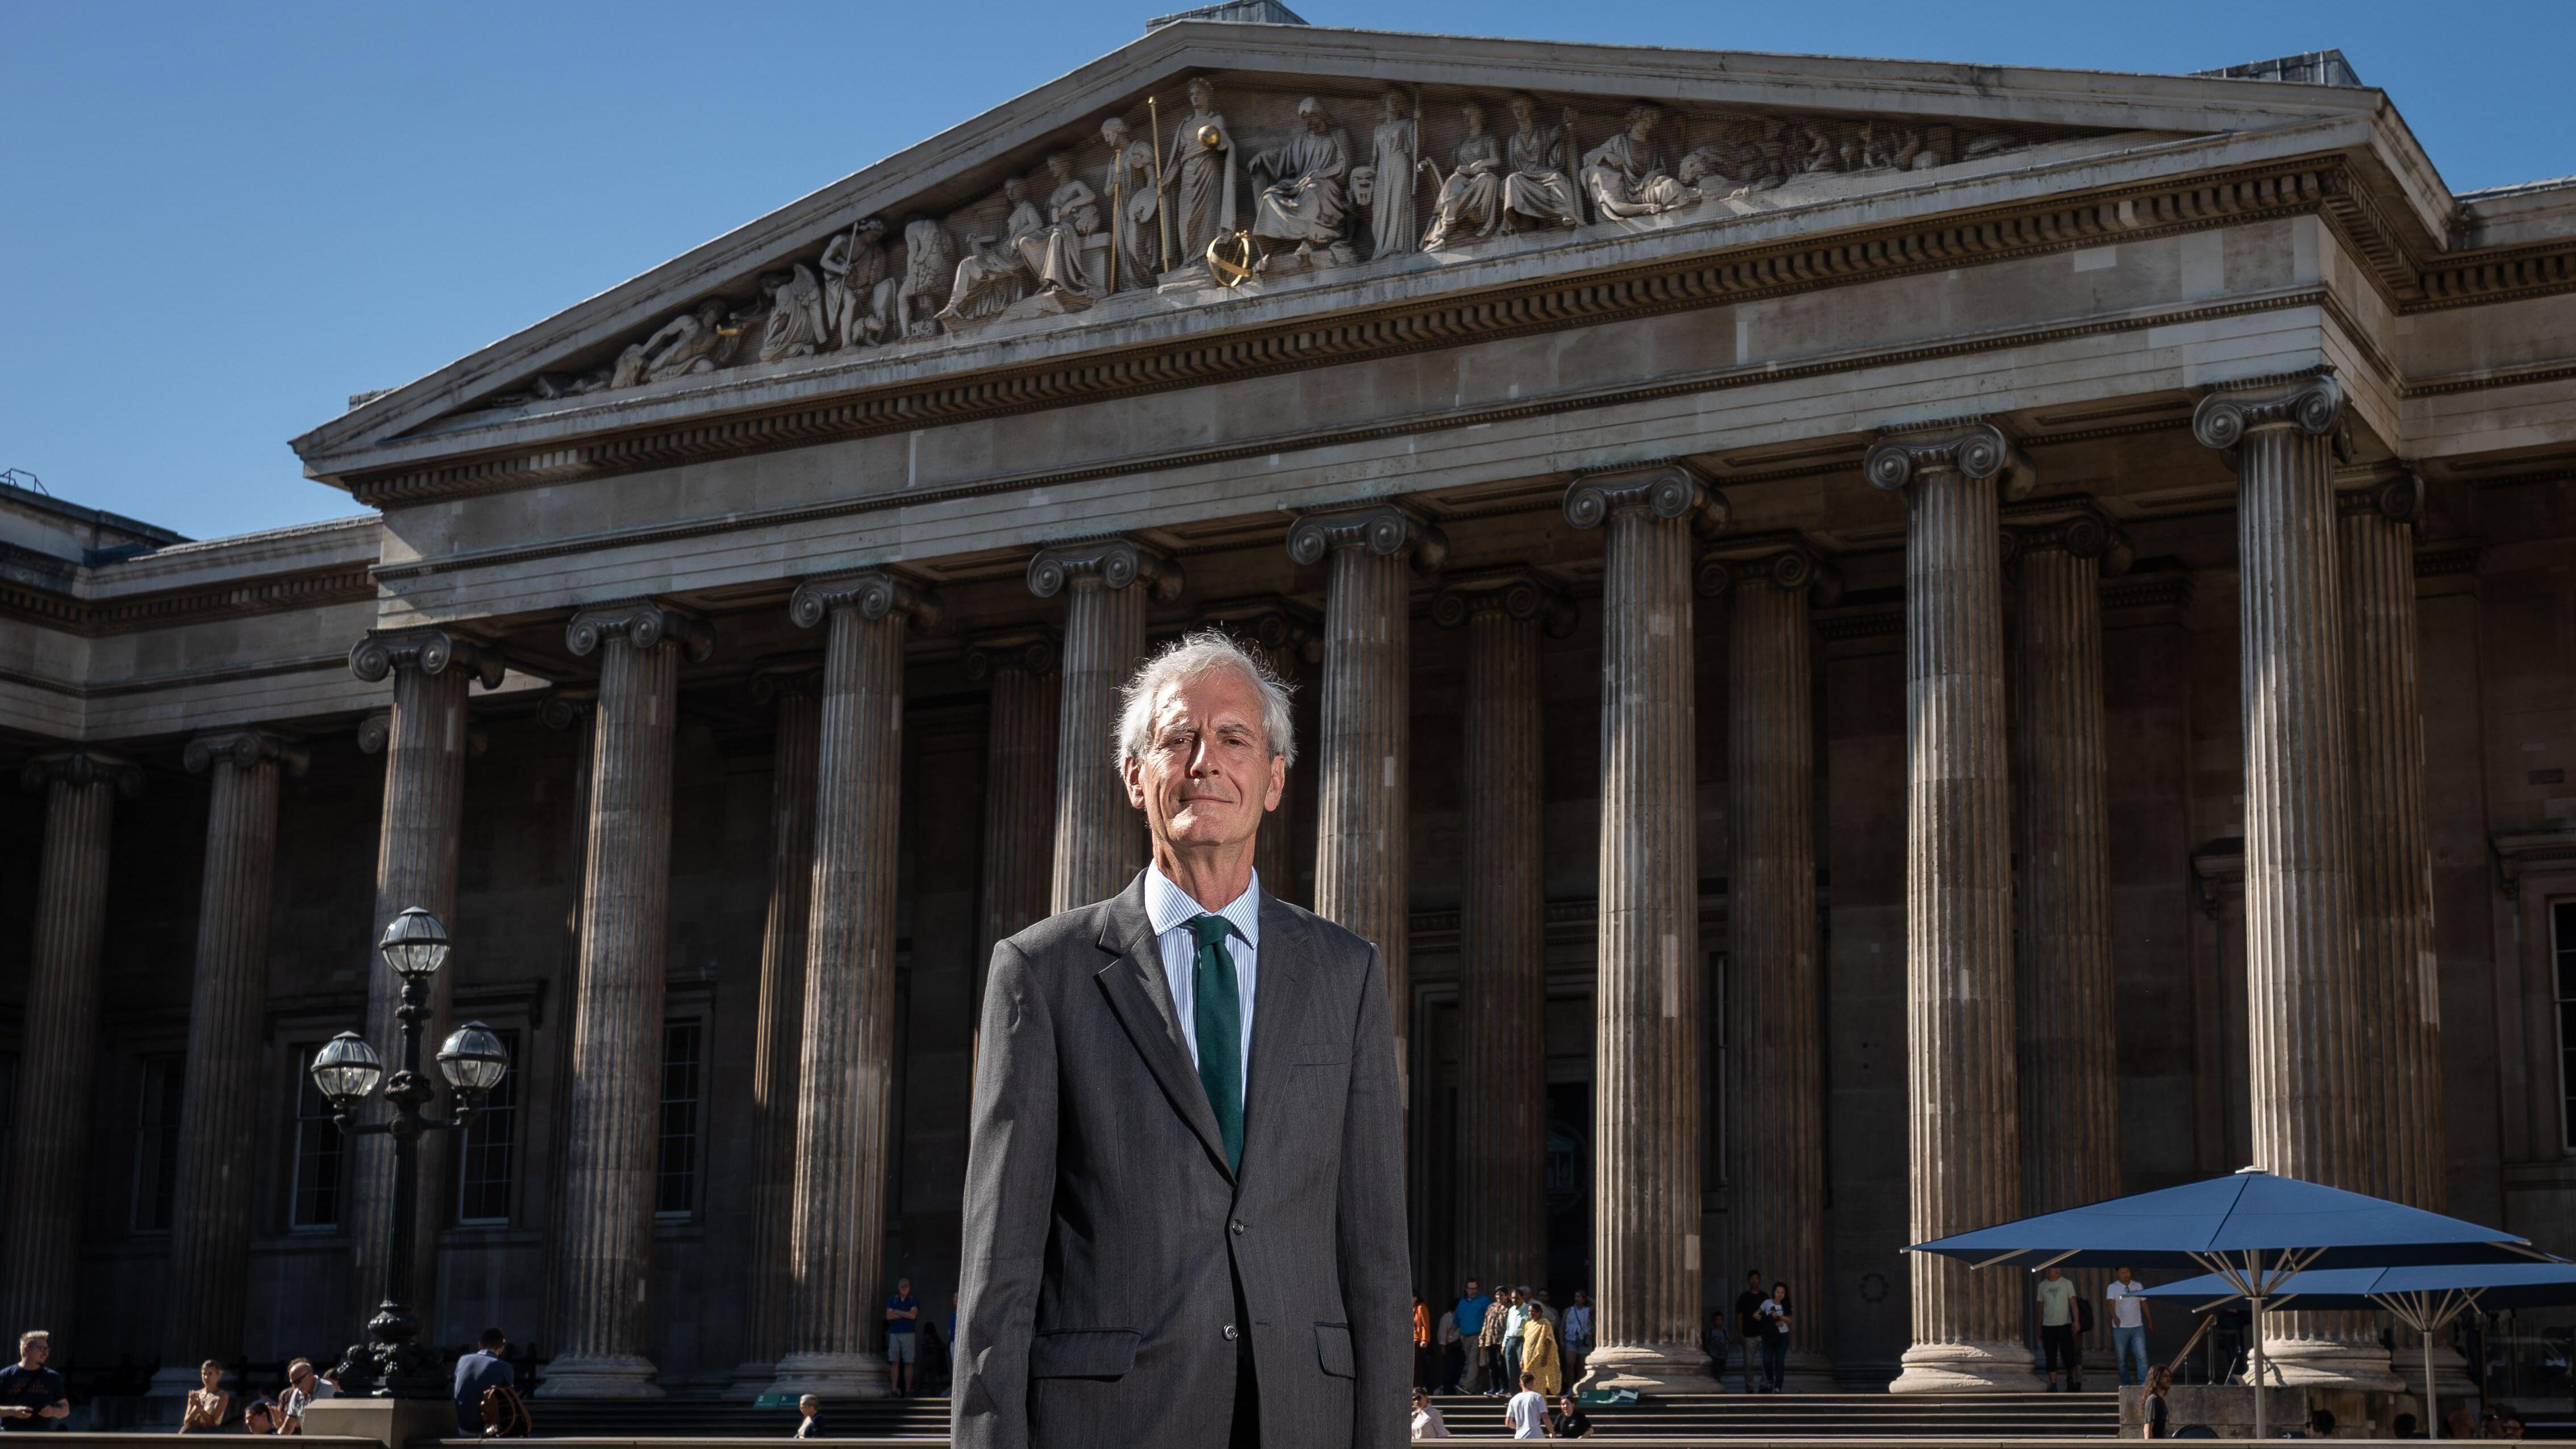 The plan to shore up British Museum: make overseas visitors pay £20